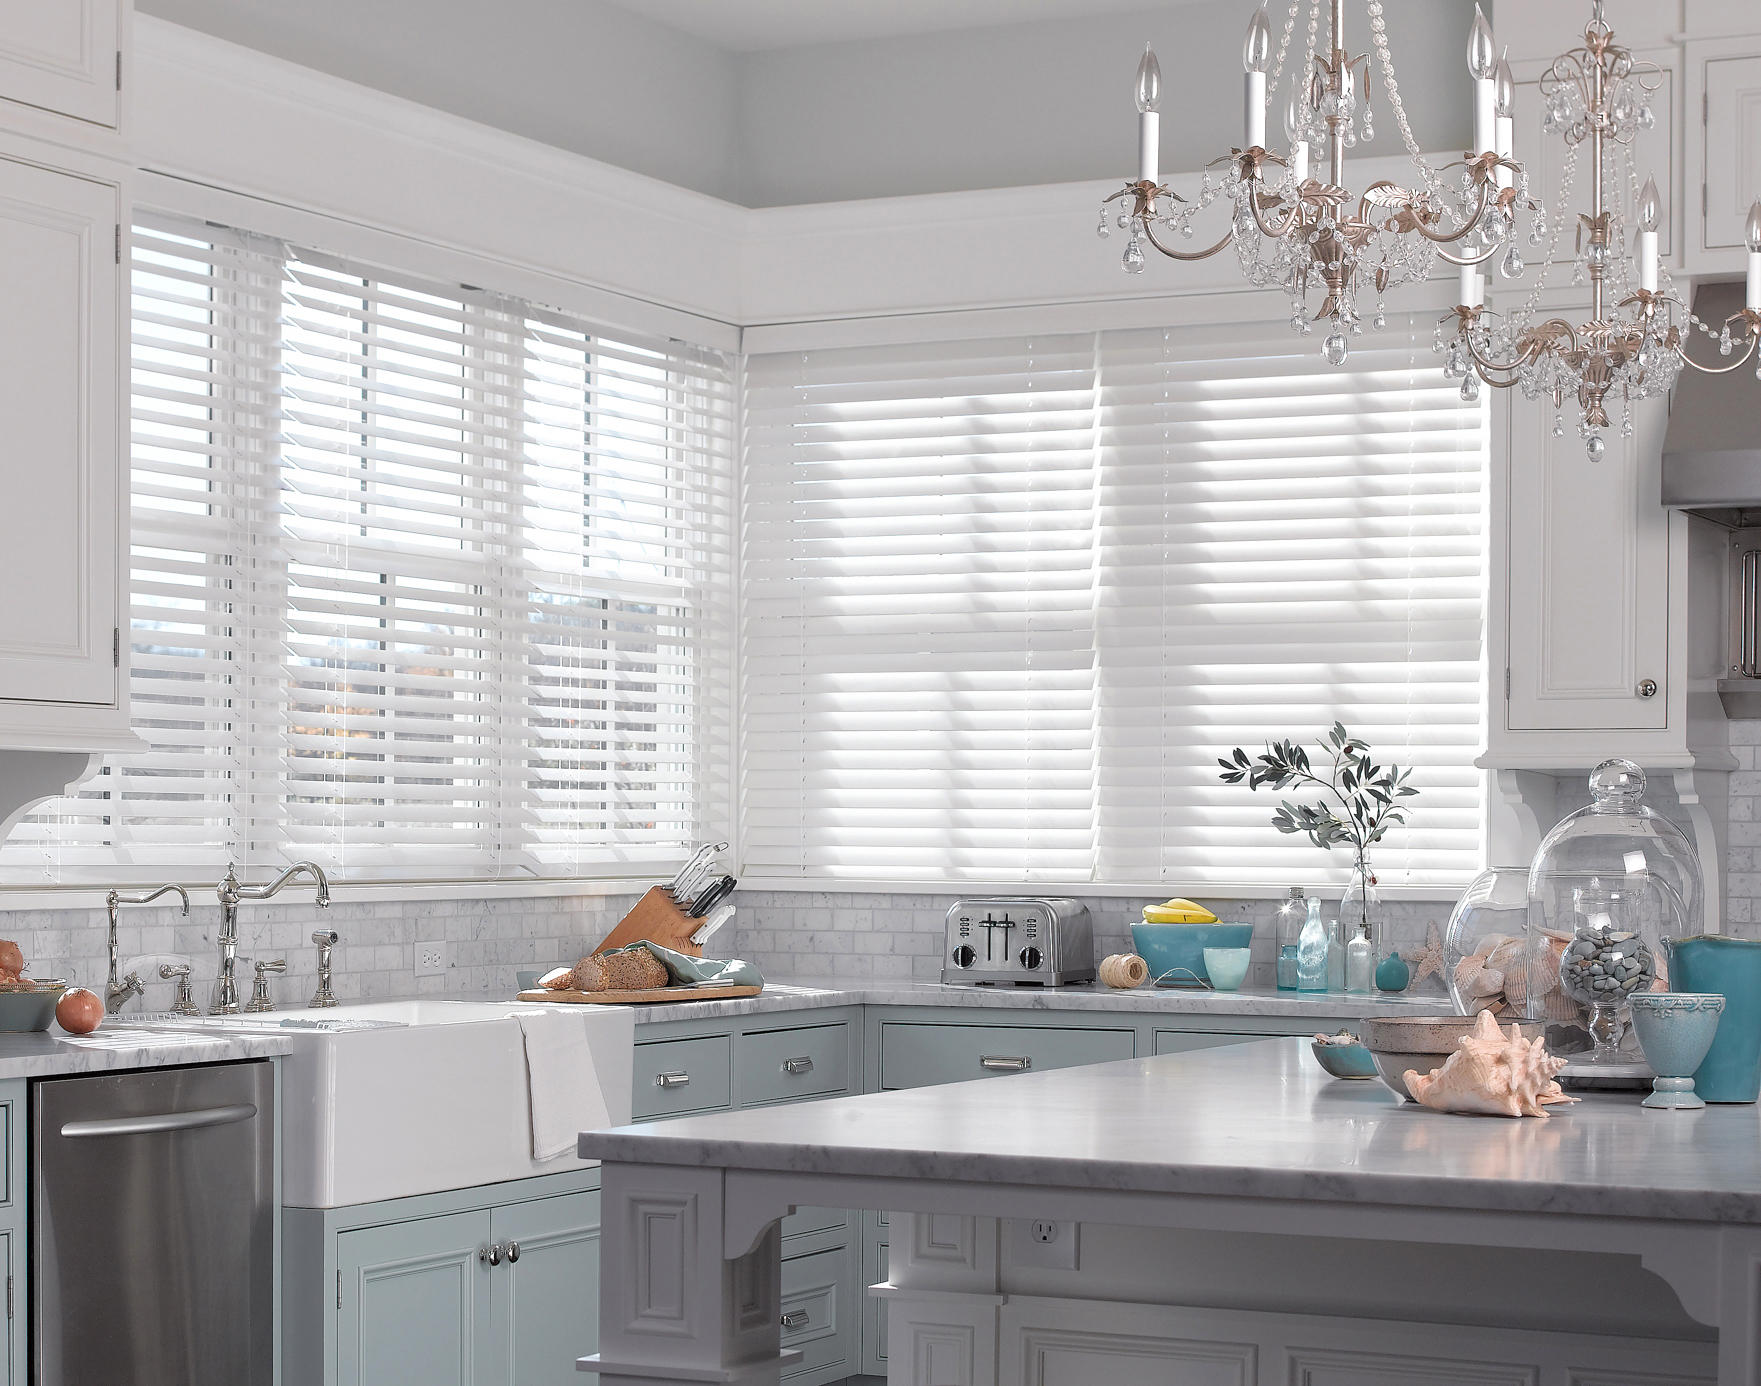 Bright and cheery is on the menu when you select bright wood blinds for the kitchen. Great for direc Budget Blinds of Kitchener & Guelph Guelph (519)341-4561